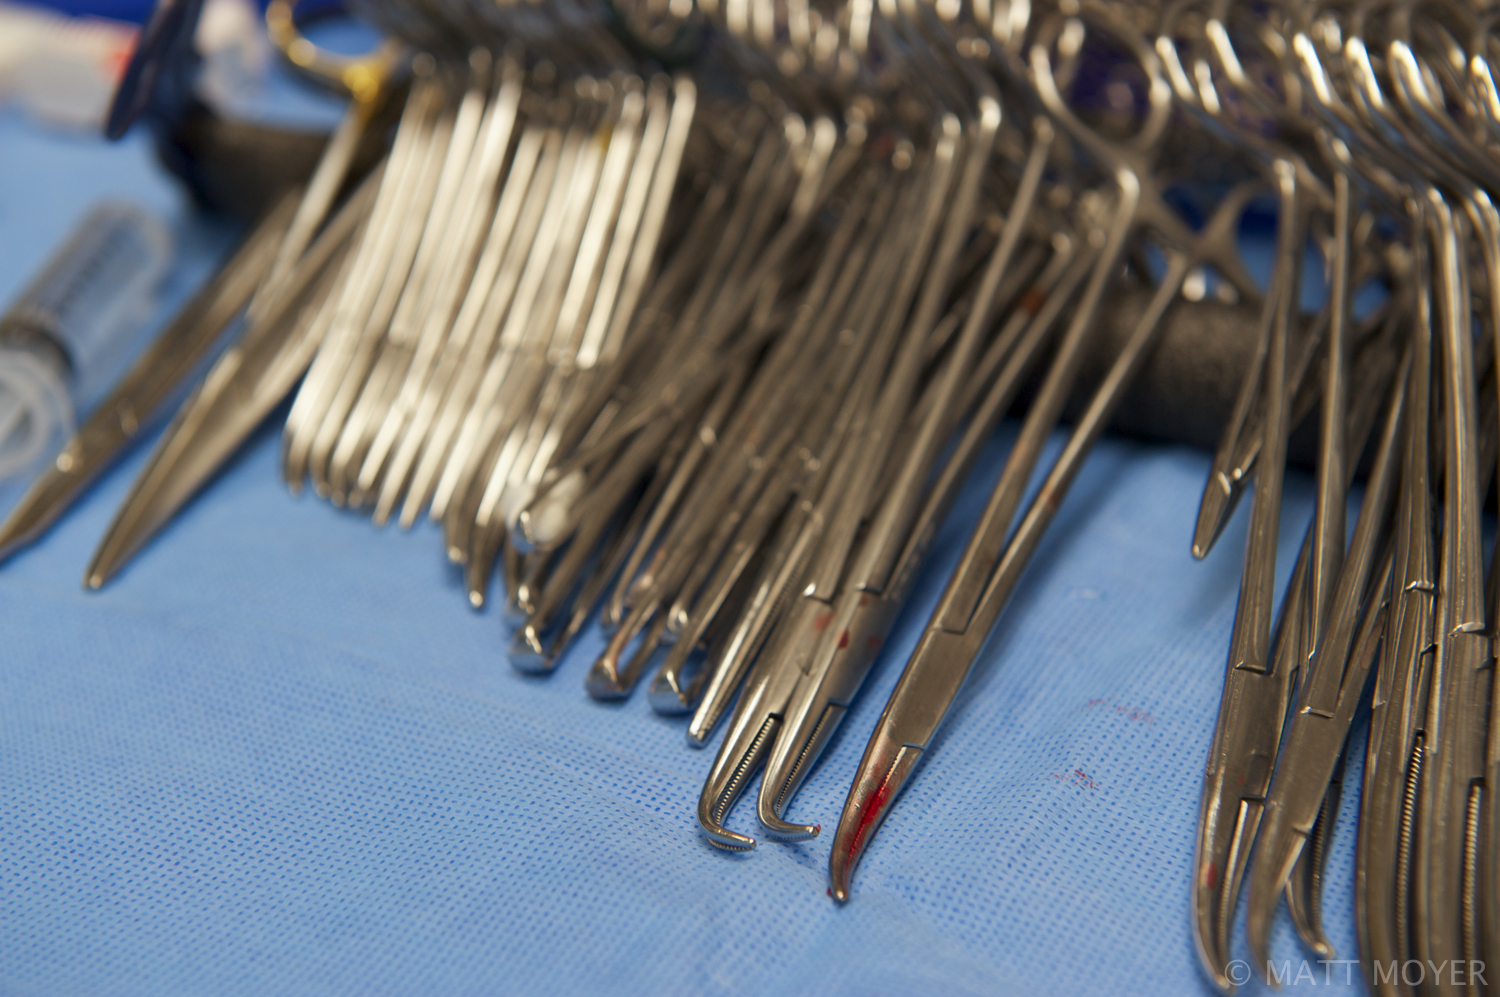  Medical instruments in an operating room used by Dr. Carla Haack, a twenty five-year-old surgical resident at Grady Memorial Hospital. 